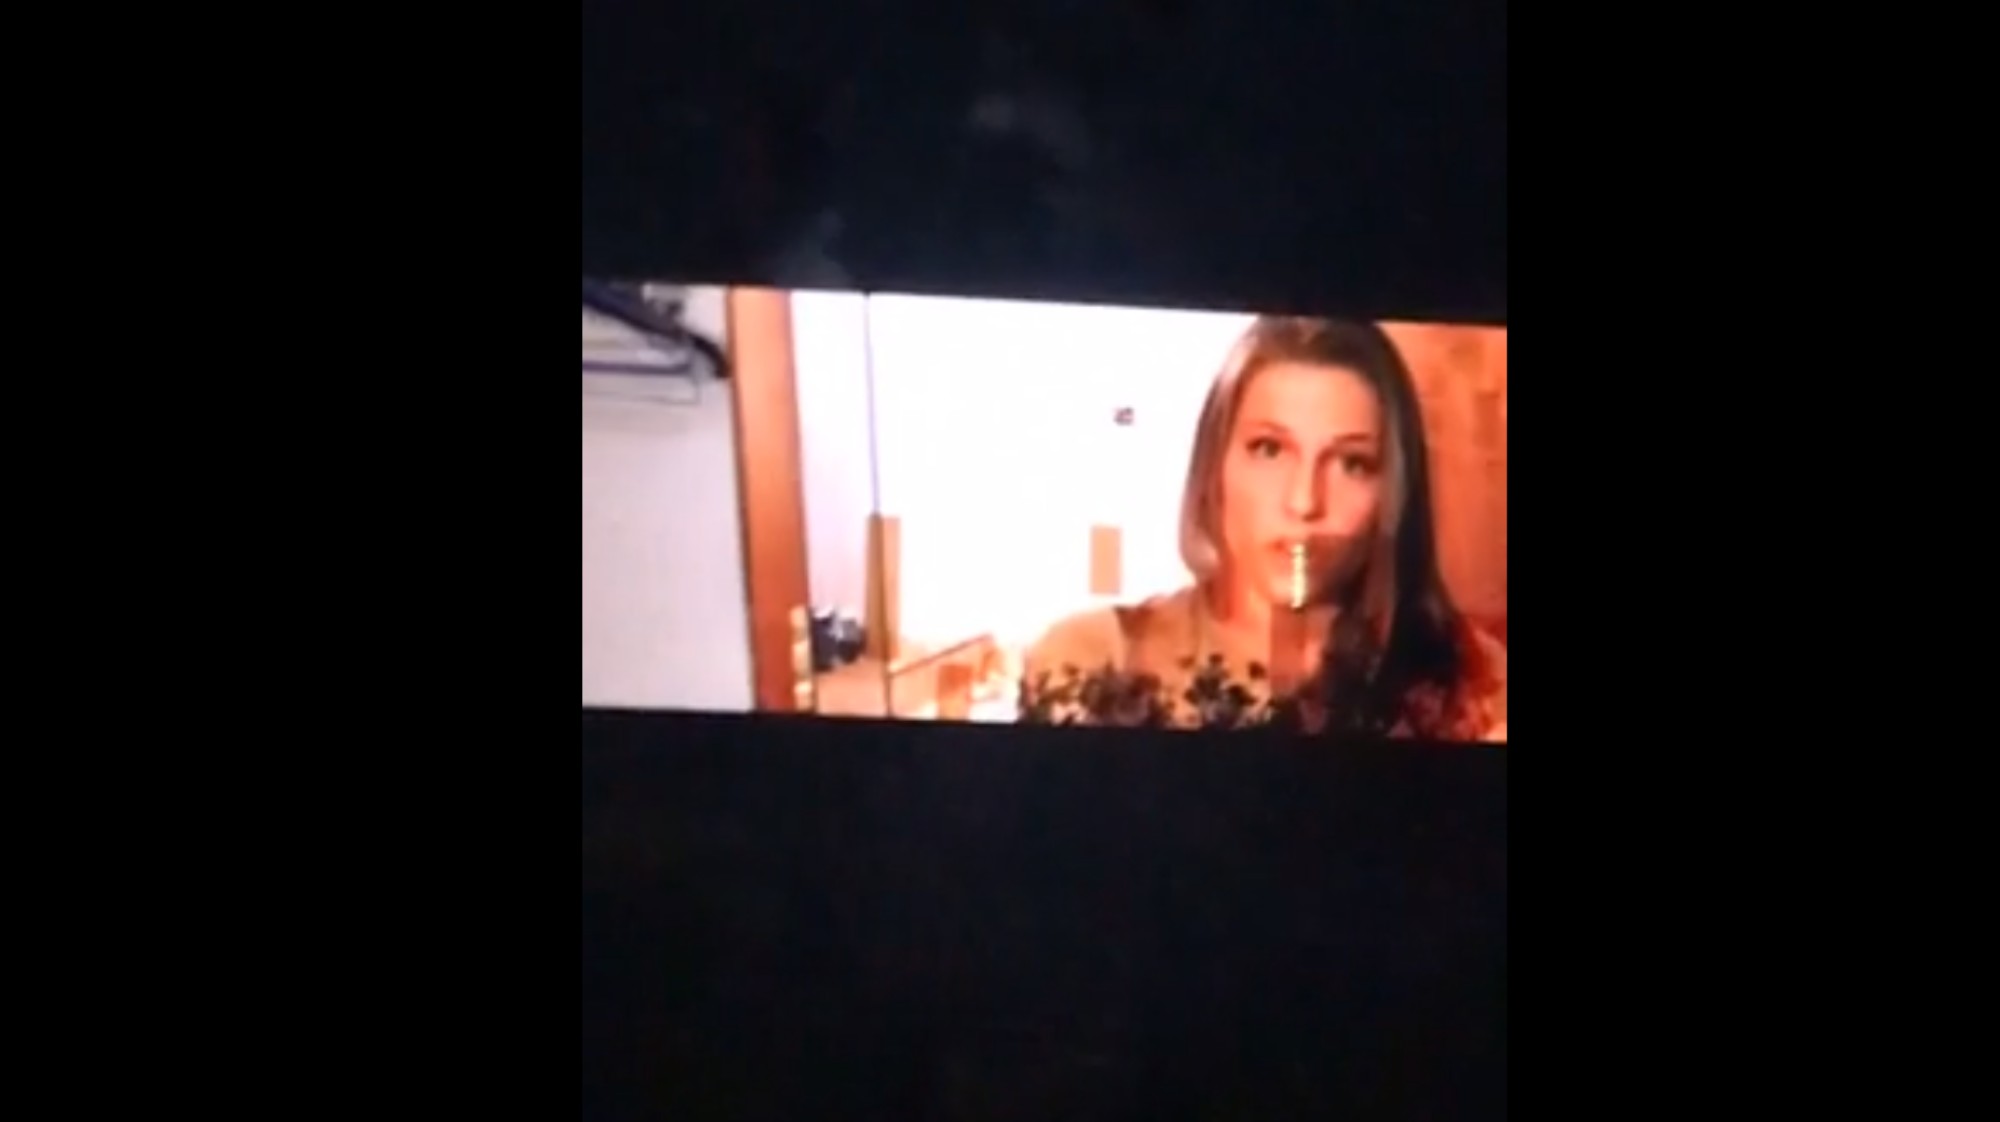 Michigan Porn - Threesome Blowjob Scene on Giant Highway Billboard Could ...